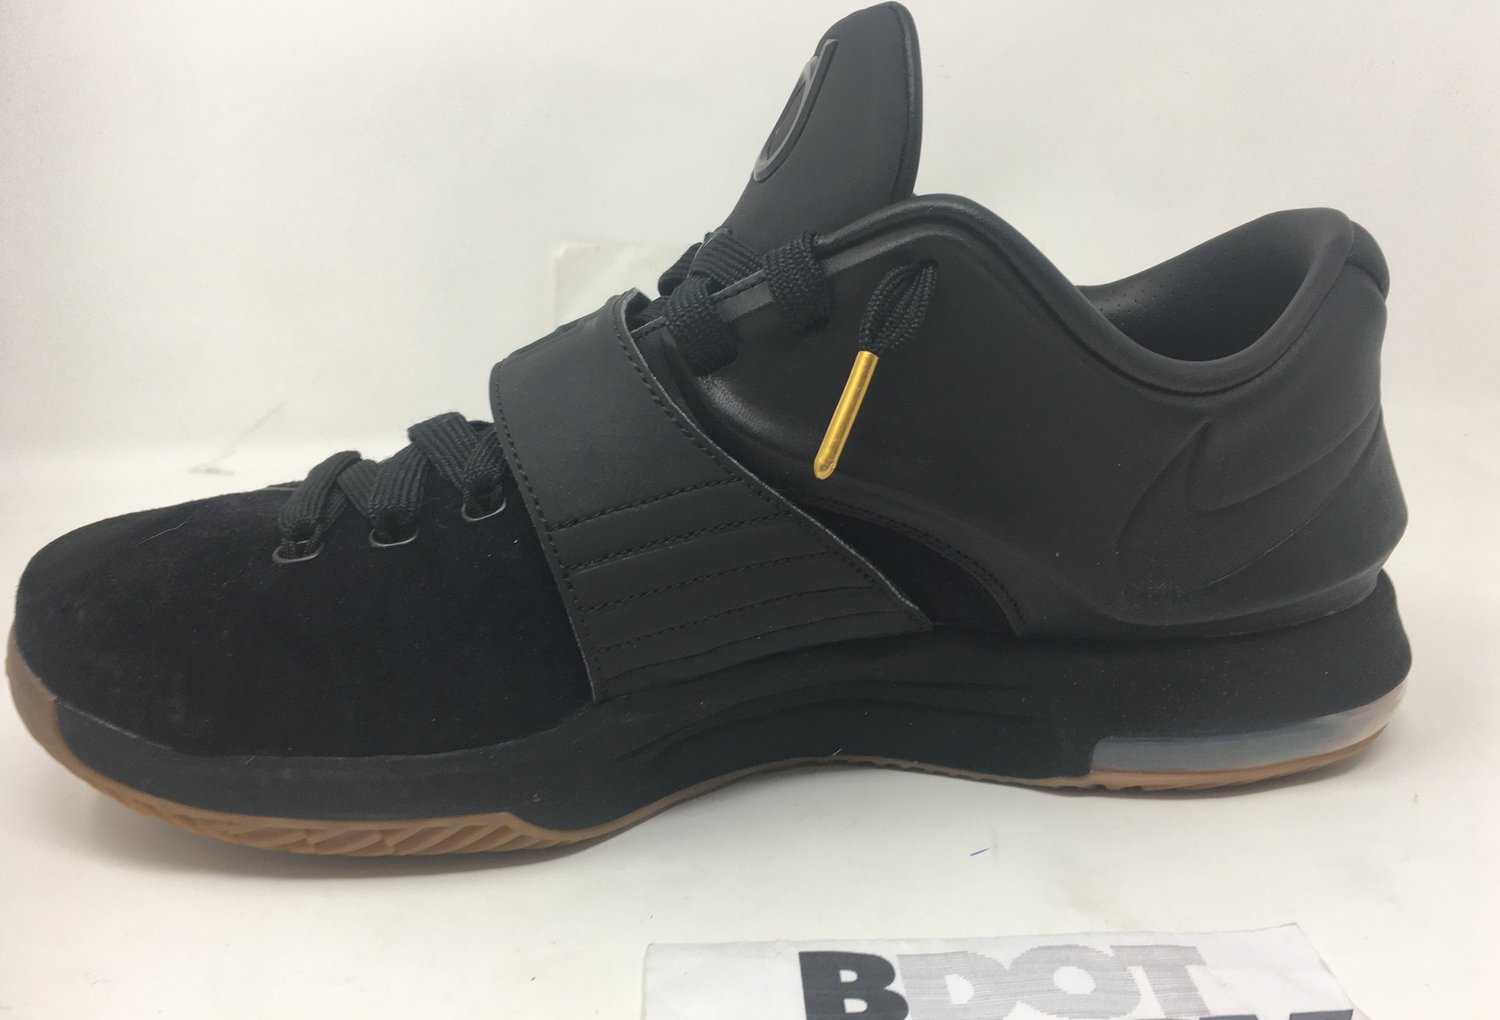 Image of Nike KD 7 Ext Suede QS "Black" Sz 10